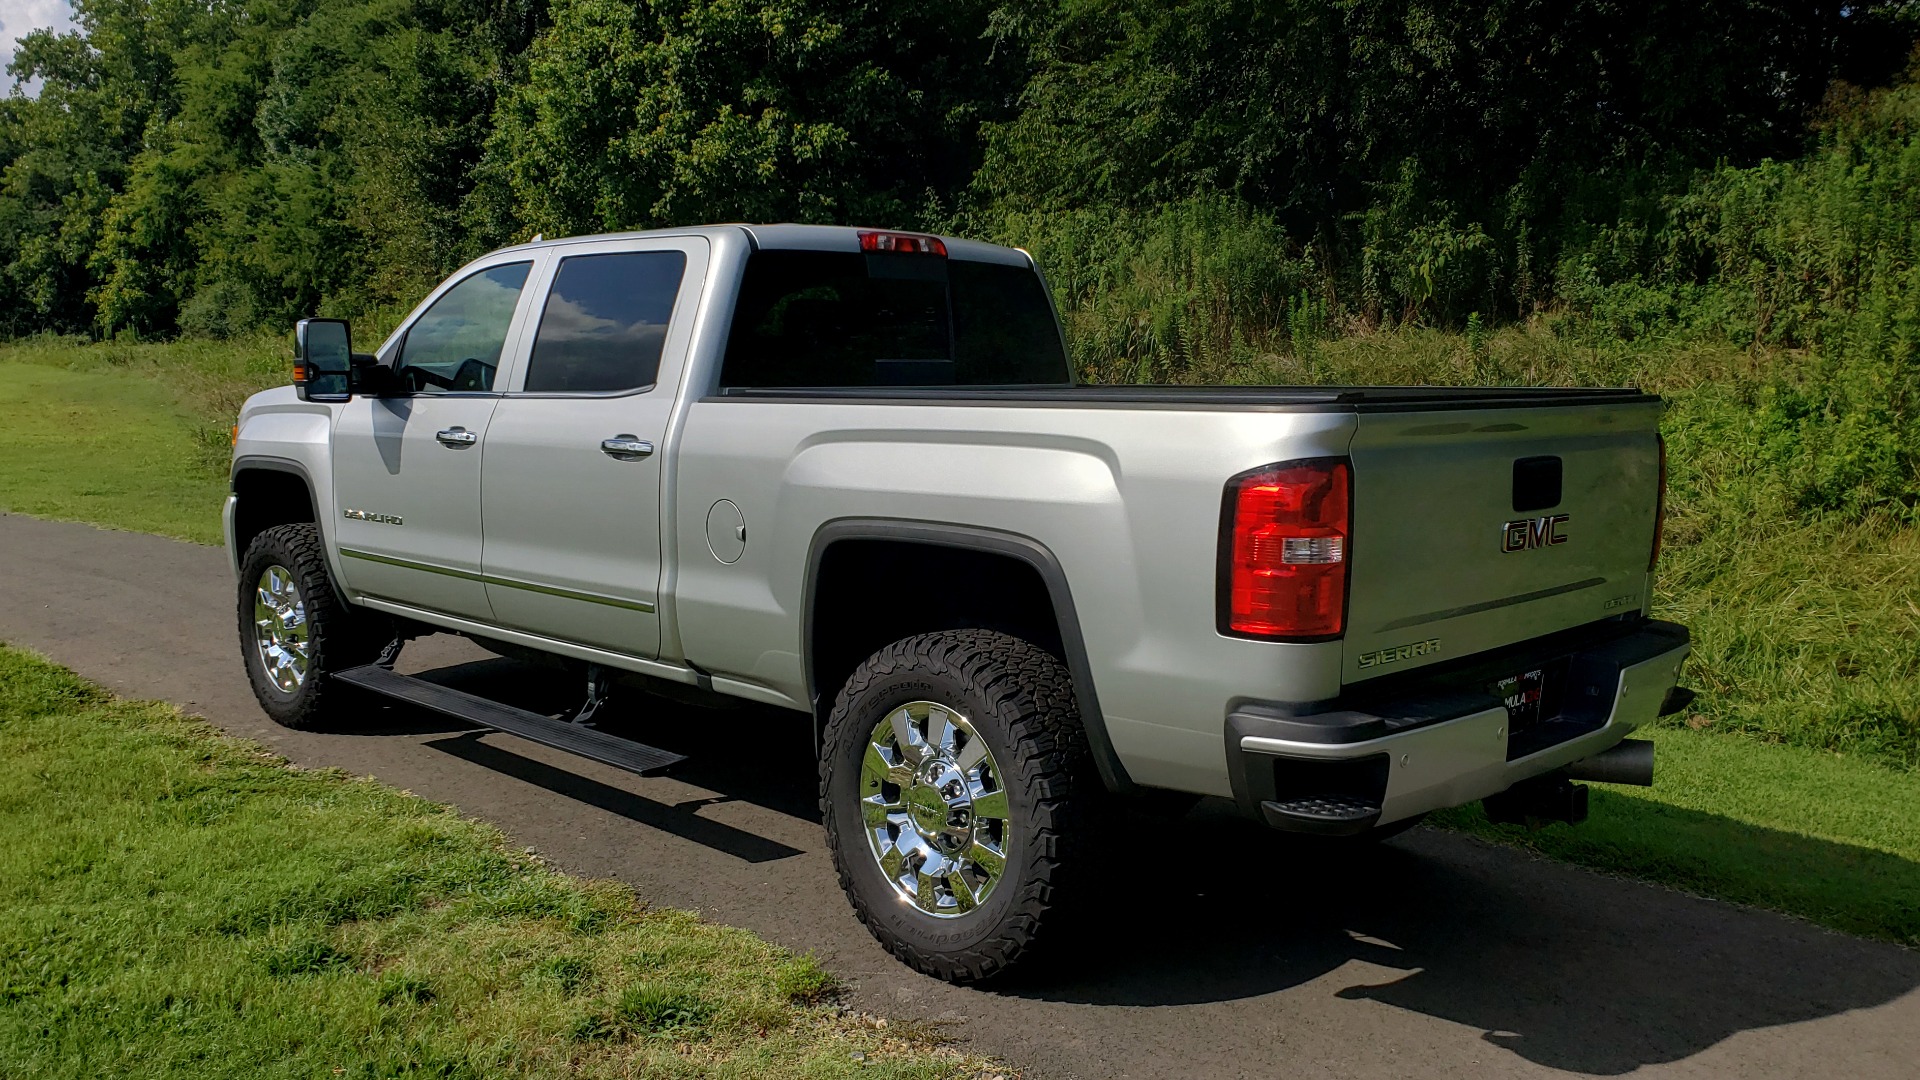 Used 2018 GMC SIERRA 2500HD DENALI 4WD / 6.6L DURAMAX / NAV / SUNROOF / BOSE / REARVIEW for sale Sold at Formula Imports in Charlotte NC 28227 4